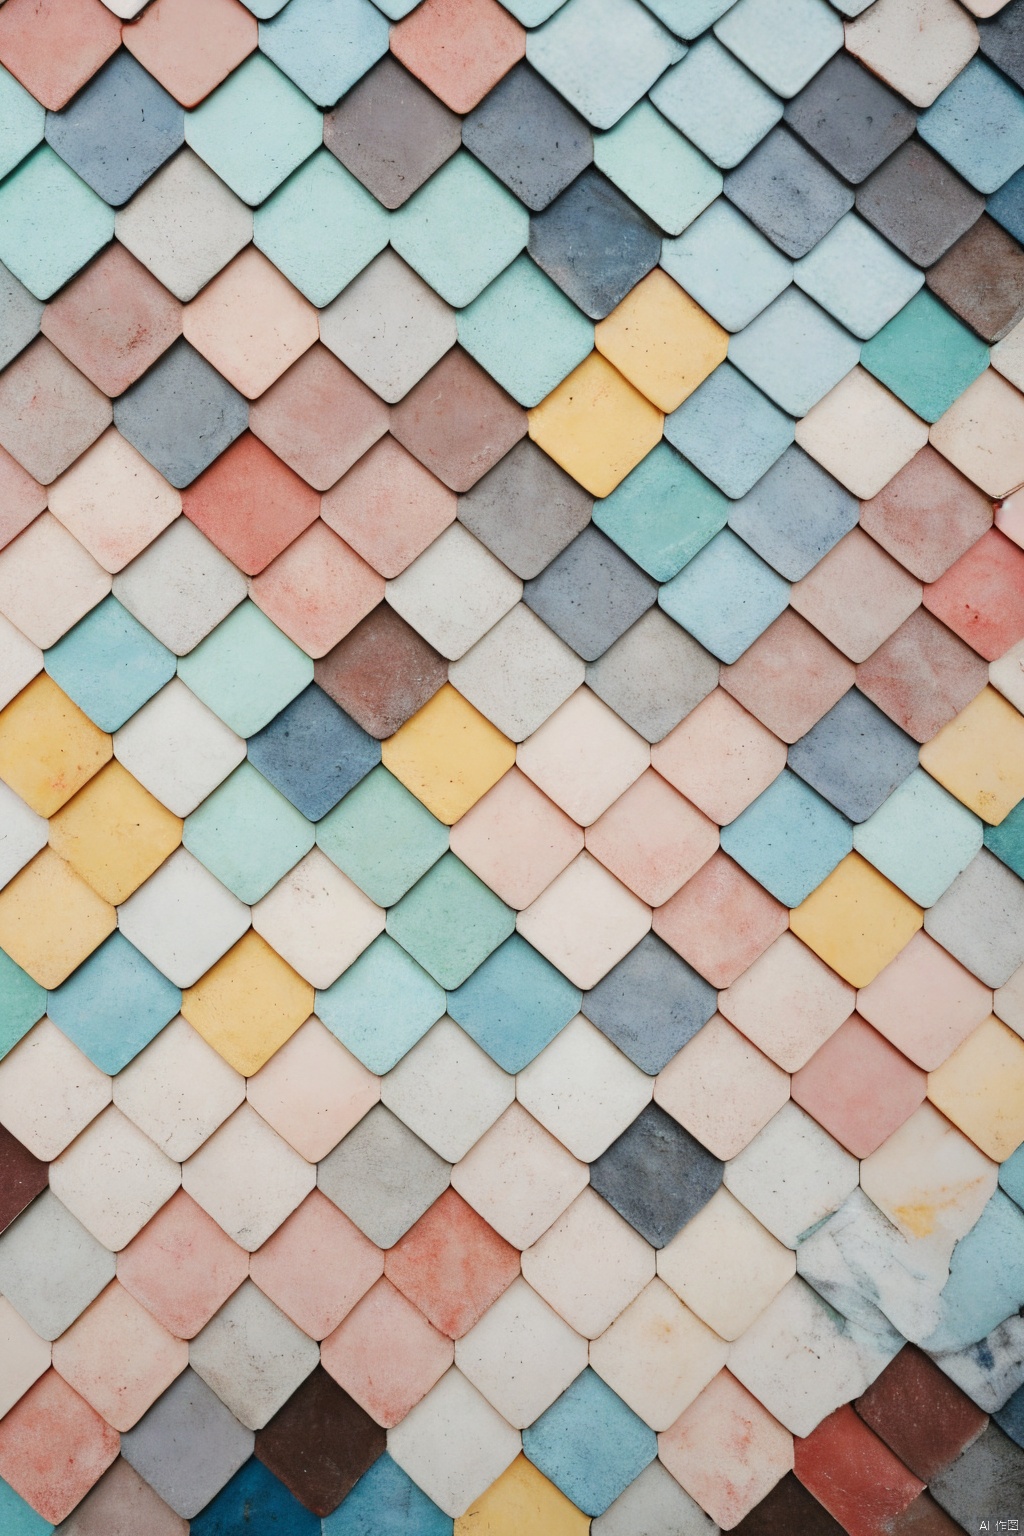 Colorful_Tiles,Colorful tiles,Colorful,square tiles,low saturation color,meranti color,Healing,Real, master photography